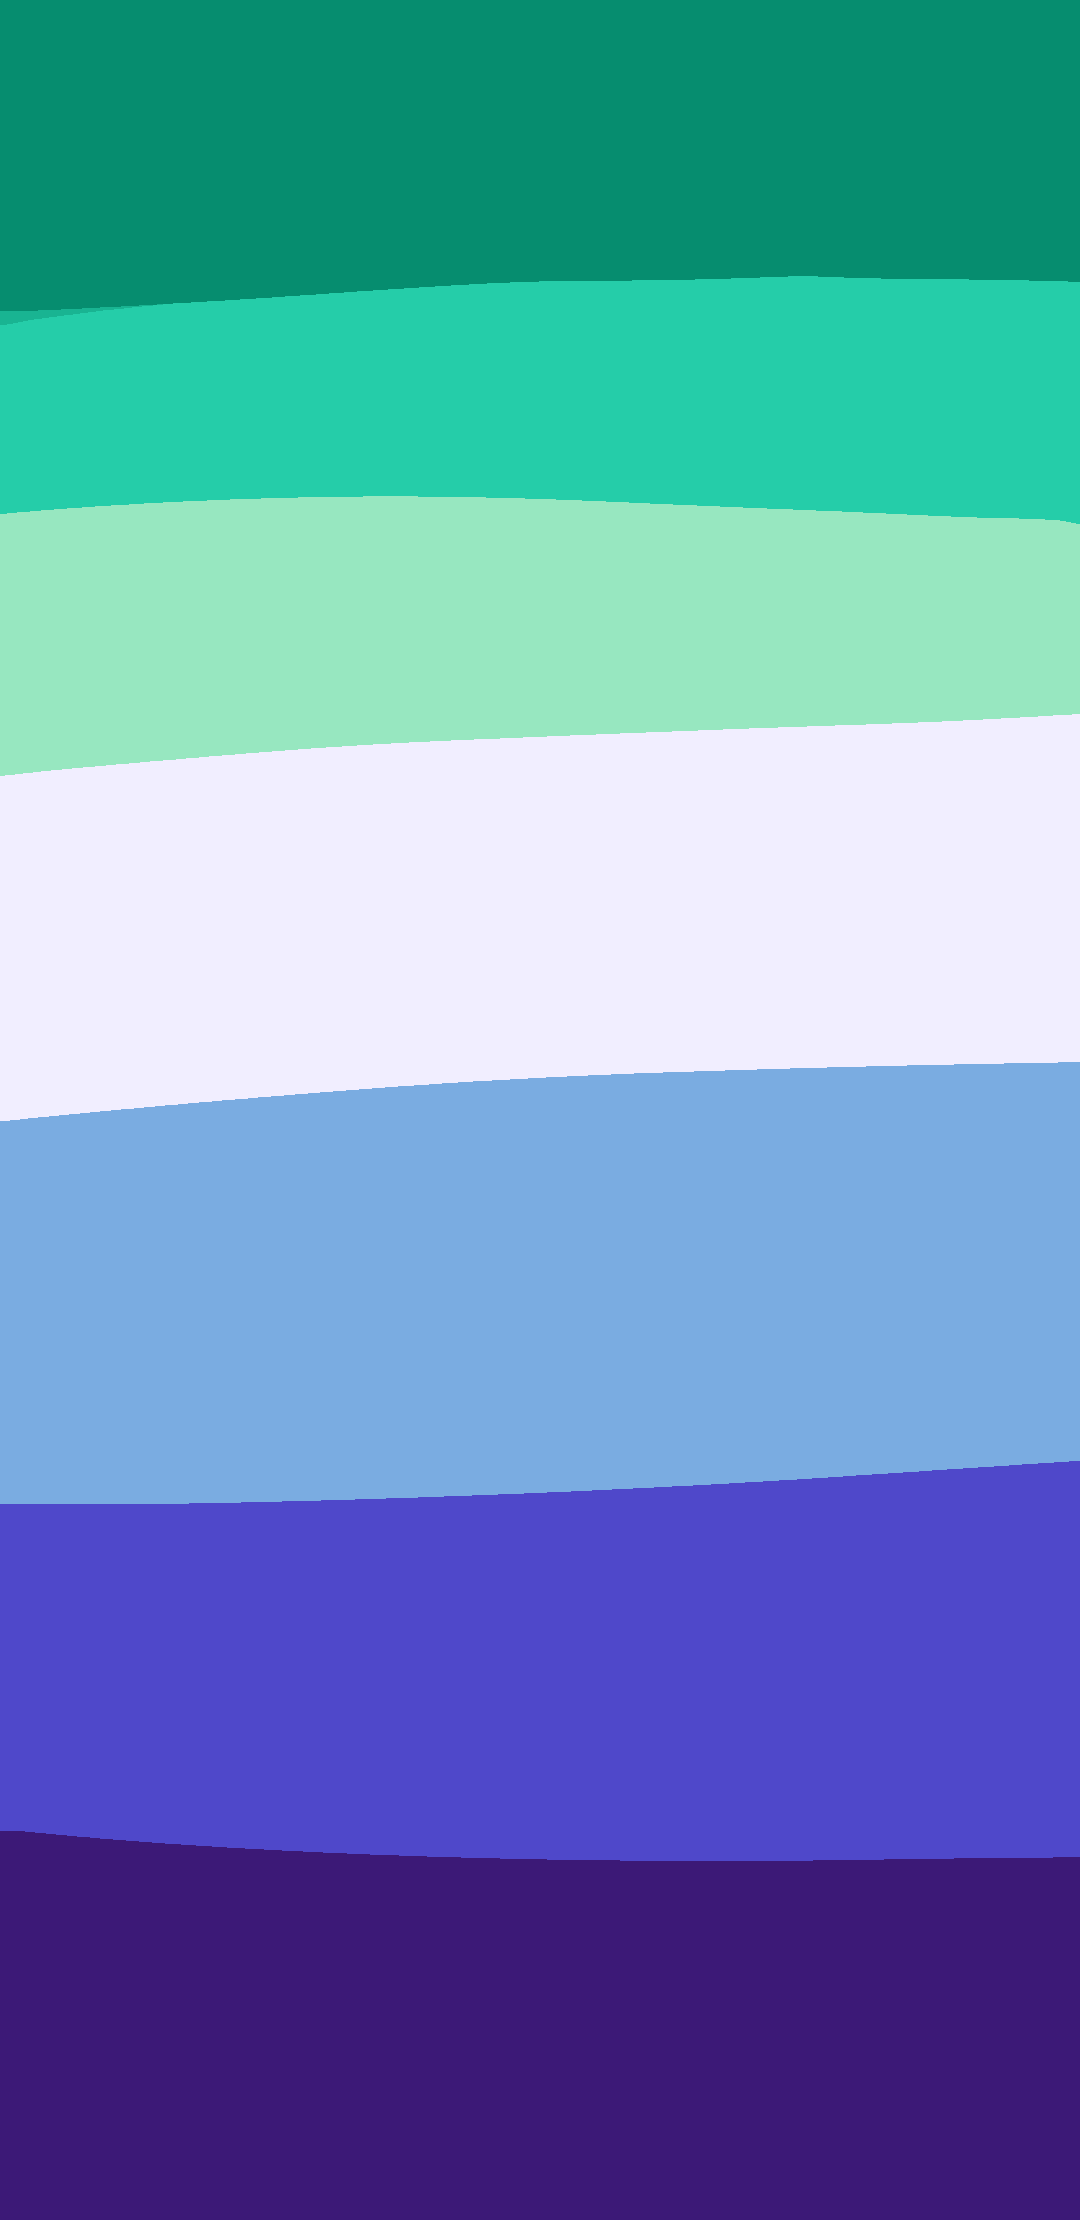 MLM flag background for Closeted friends